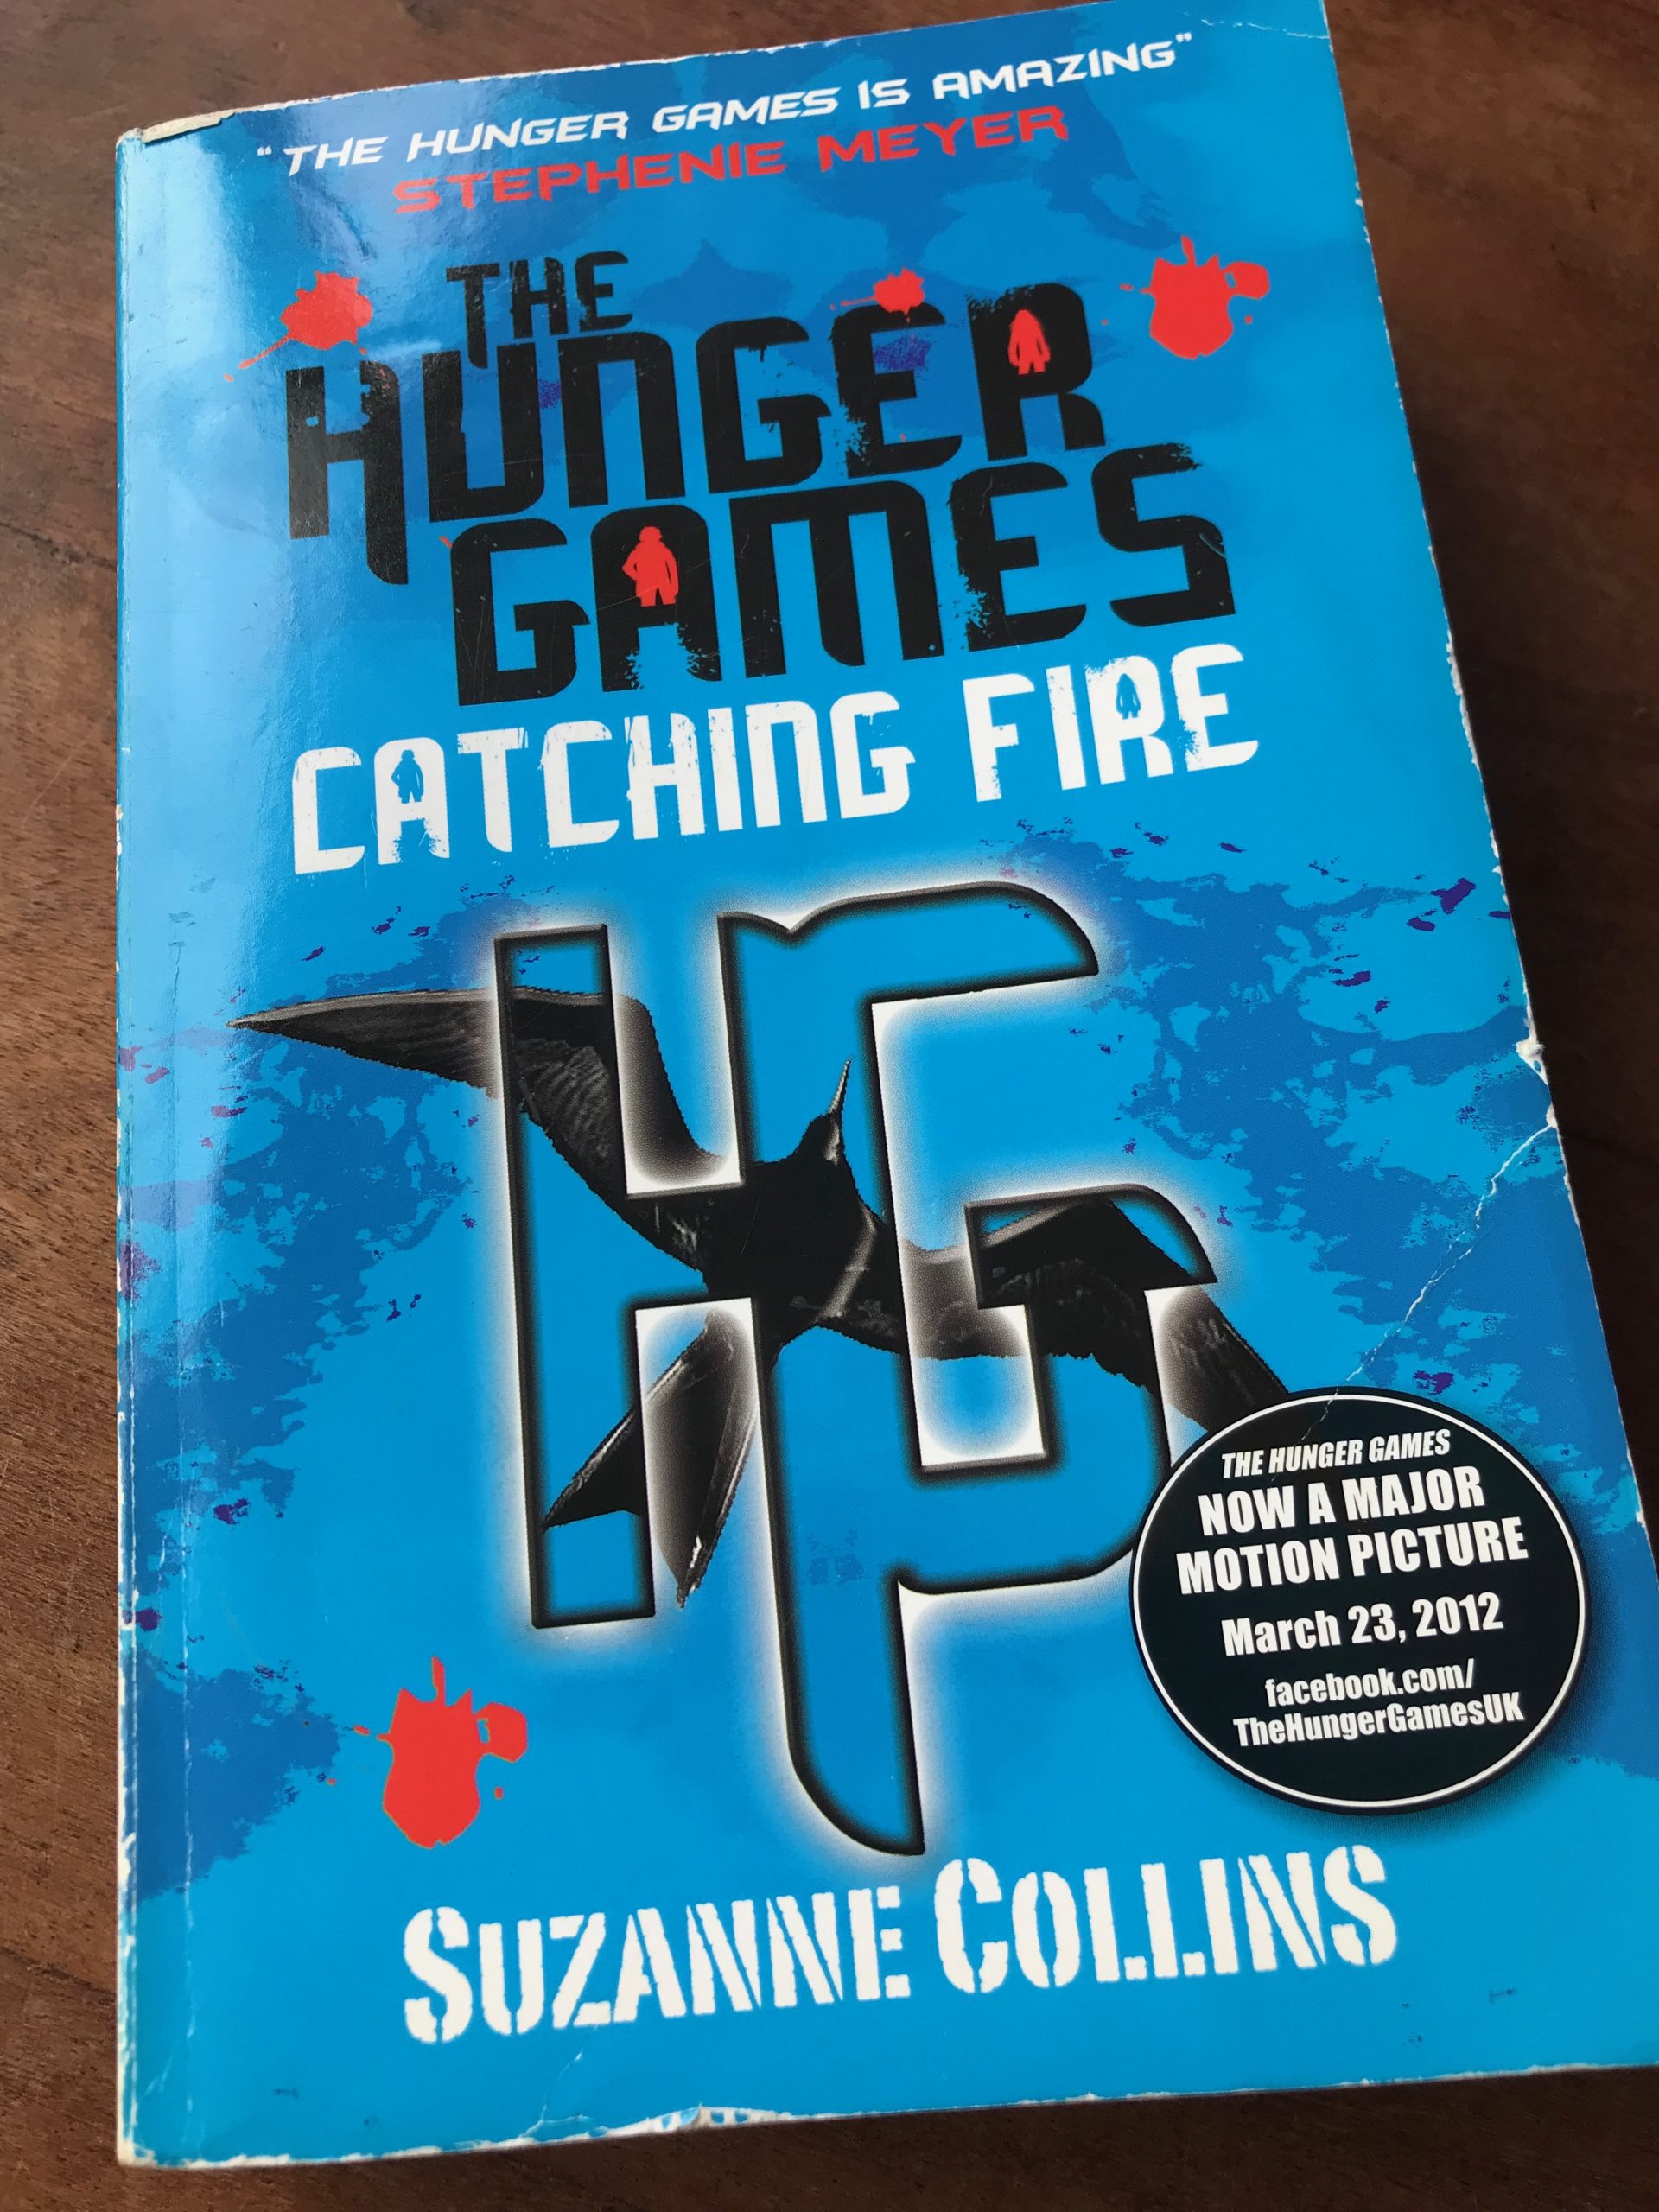 Catching Fire by Suzanne Collins